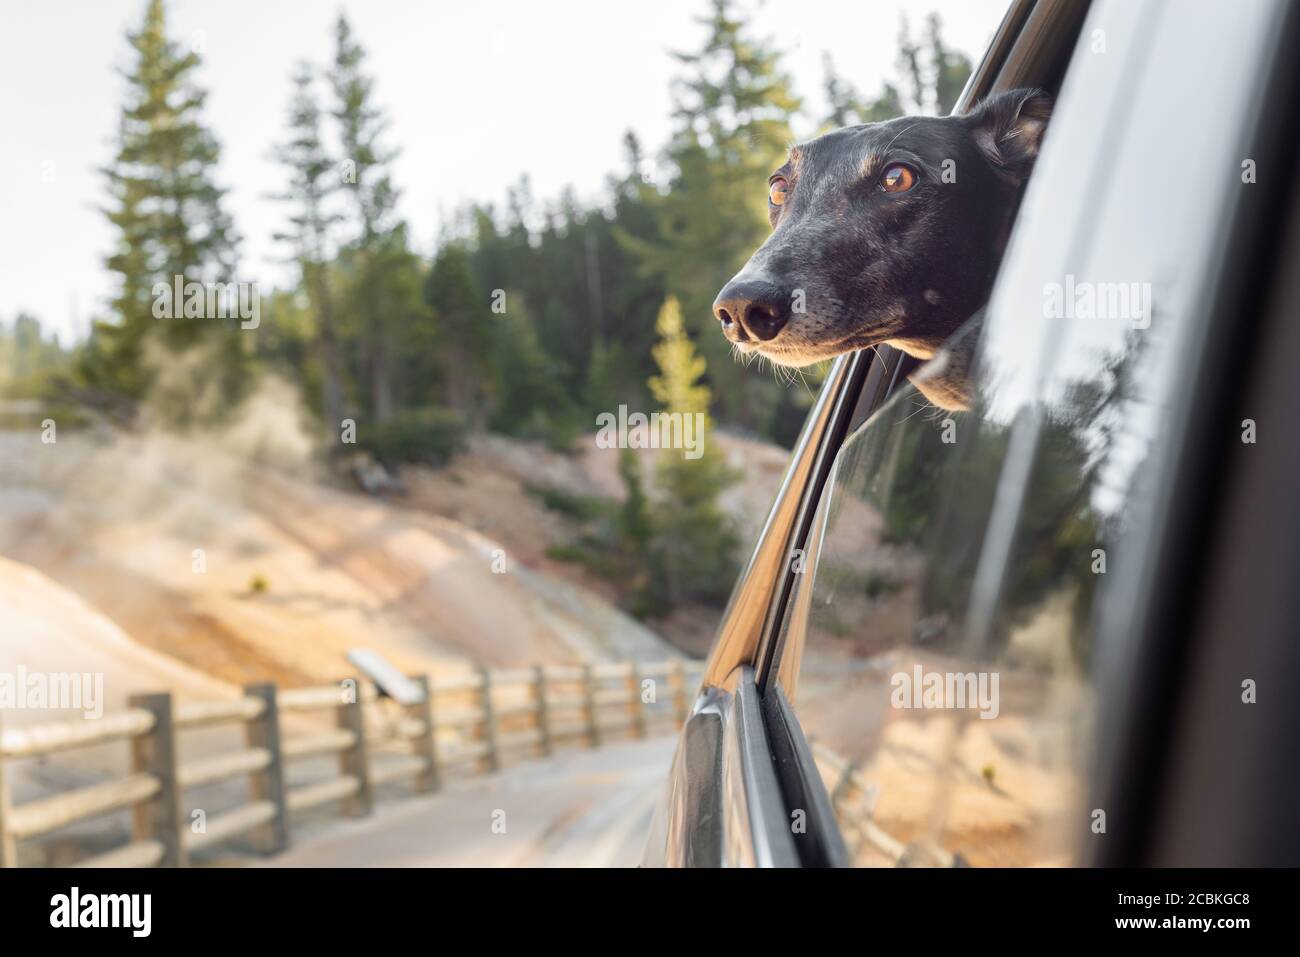 Greyhound pet dog enjoys a road trip with its head out the car window Stock Photo